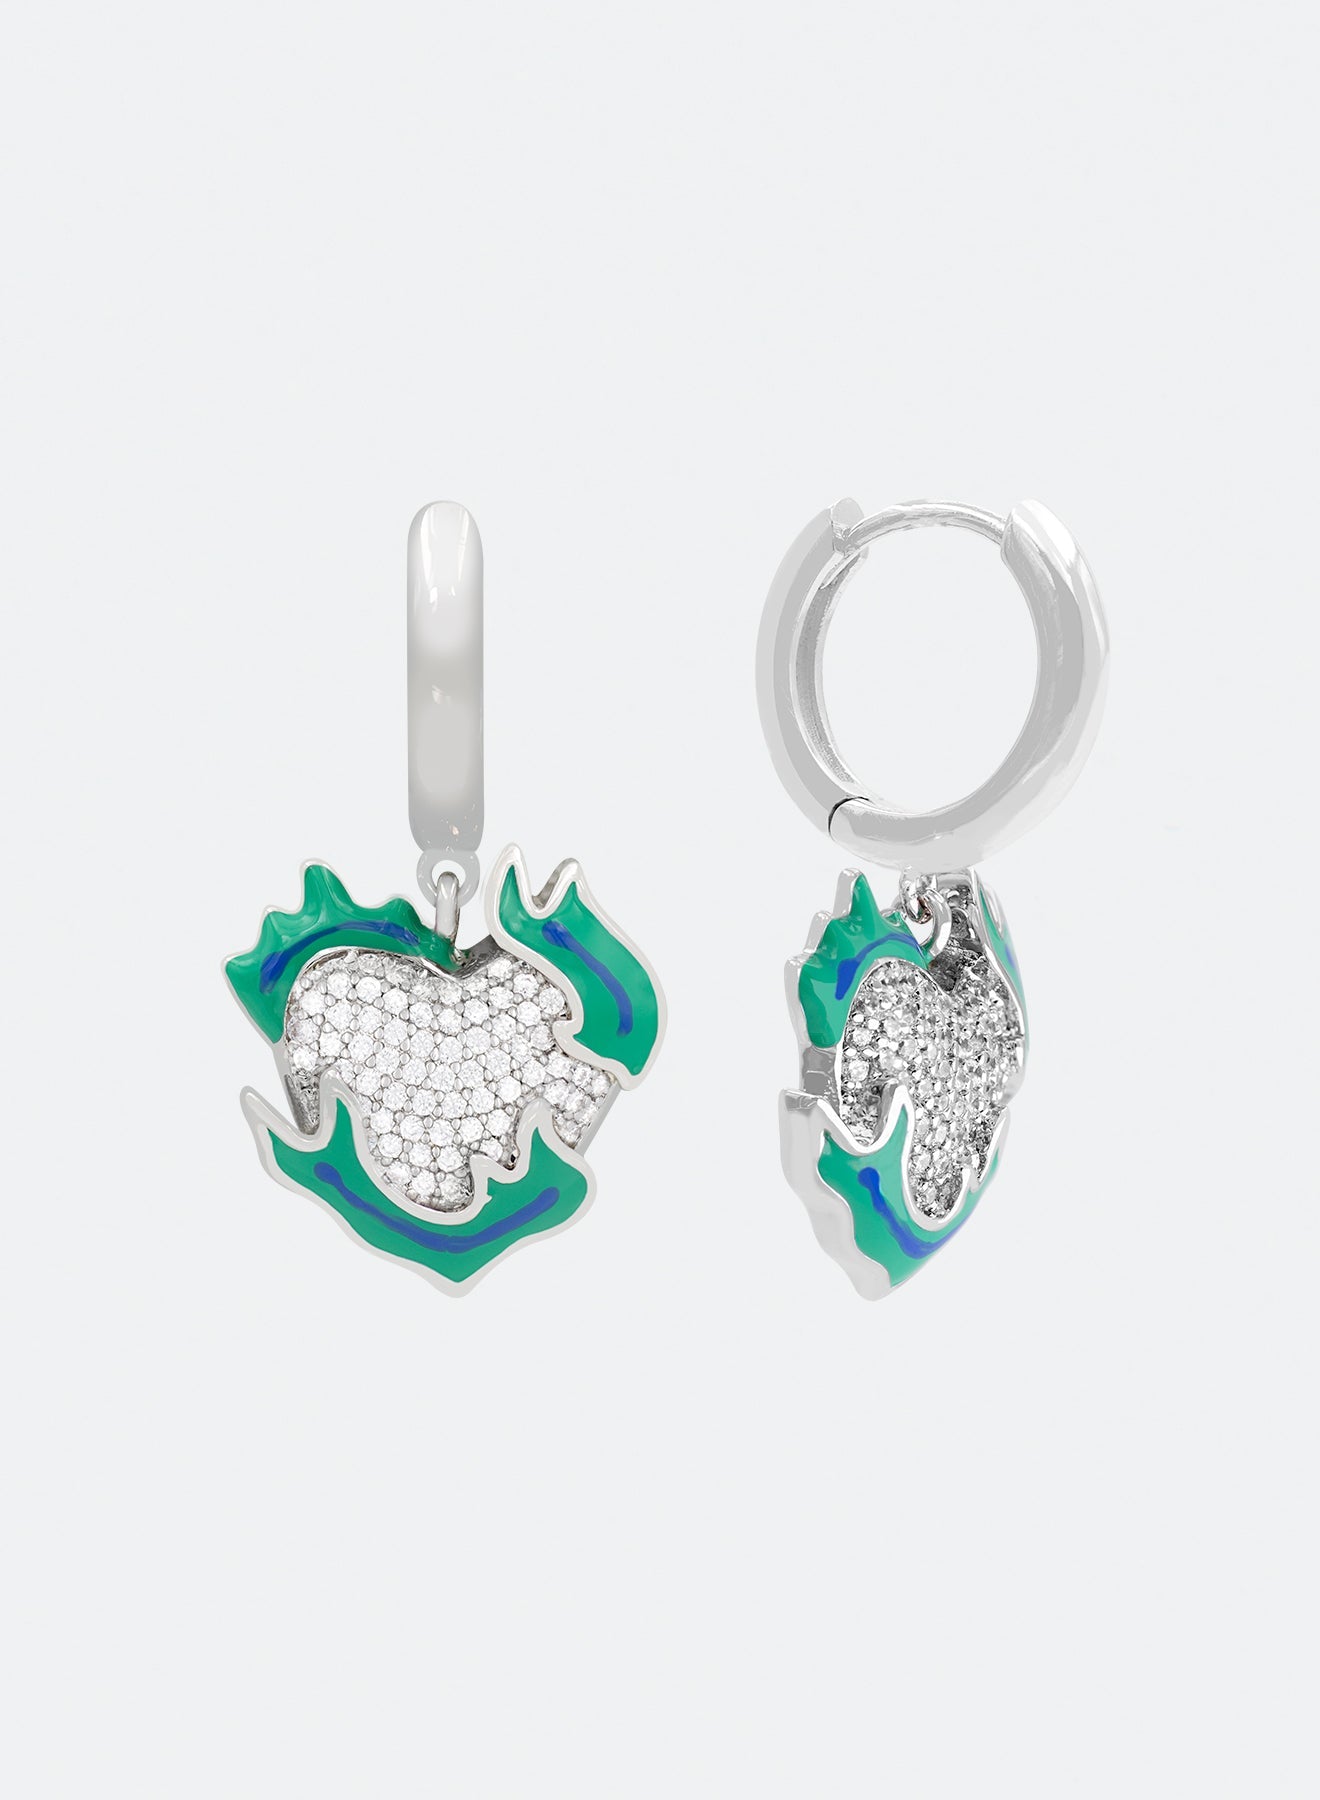 18k white gold coated heart earrings with hand-set micropavè stones in white and green-blue hand painted enamel